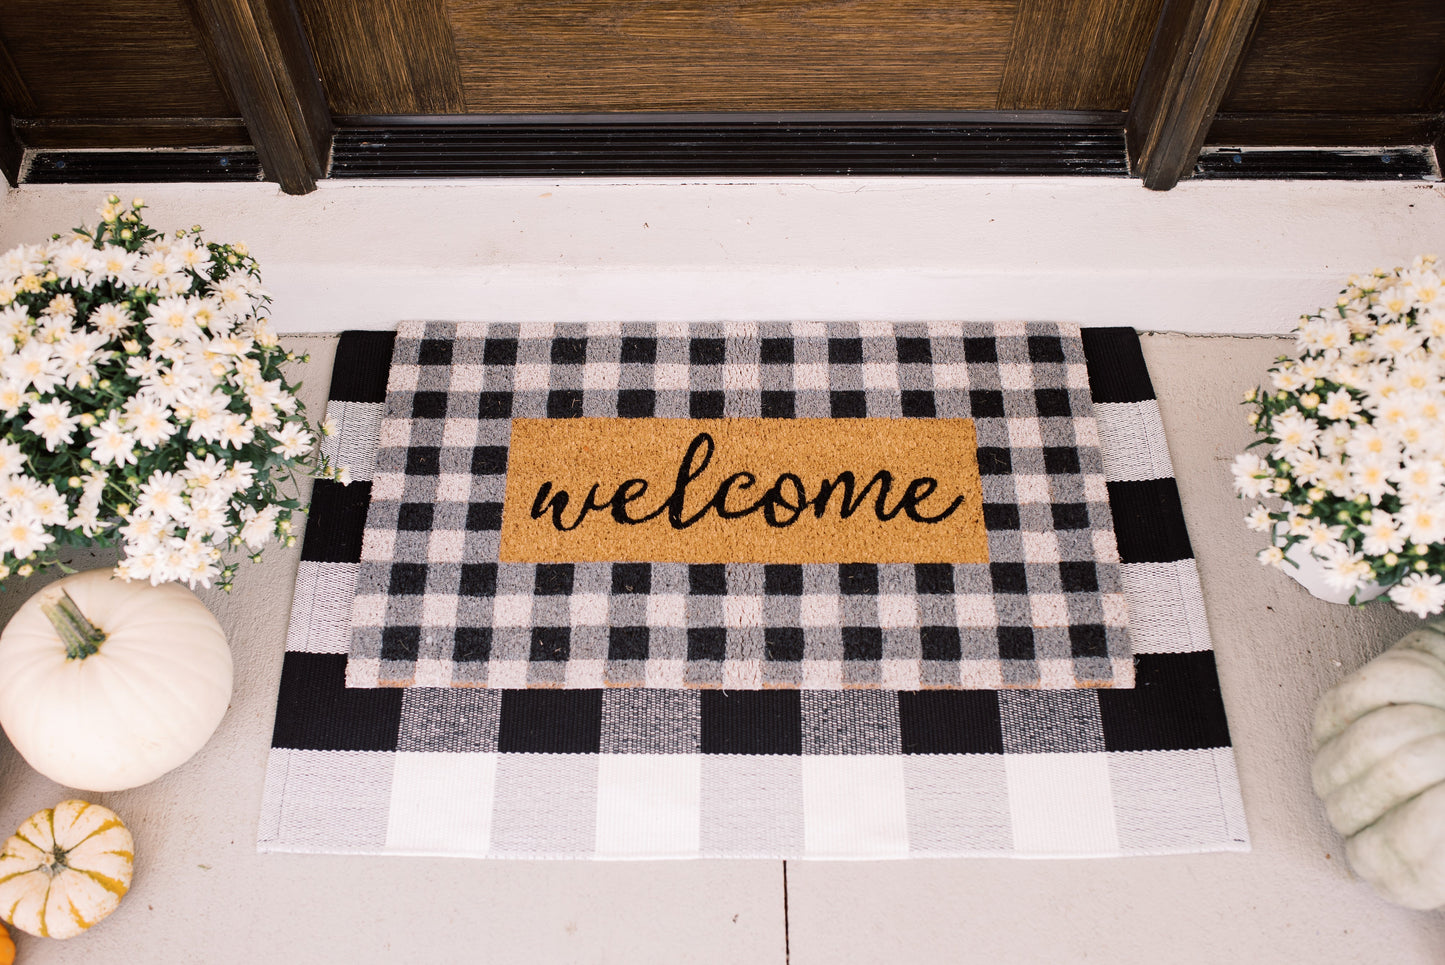 Theodore Magnus Natural Coir Doormat with non-slip backing - 17 x 30 - Outdoor / Indoor - Natural - Buffalo Check Welcome